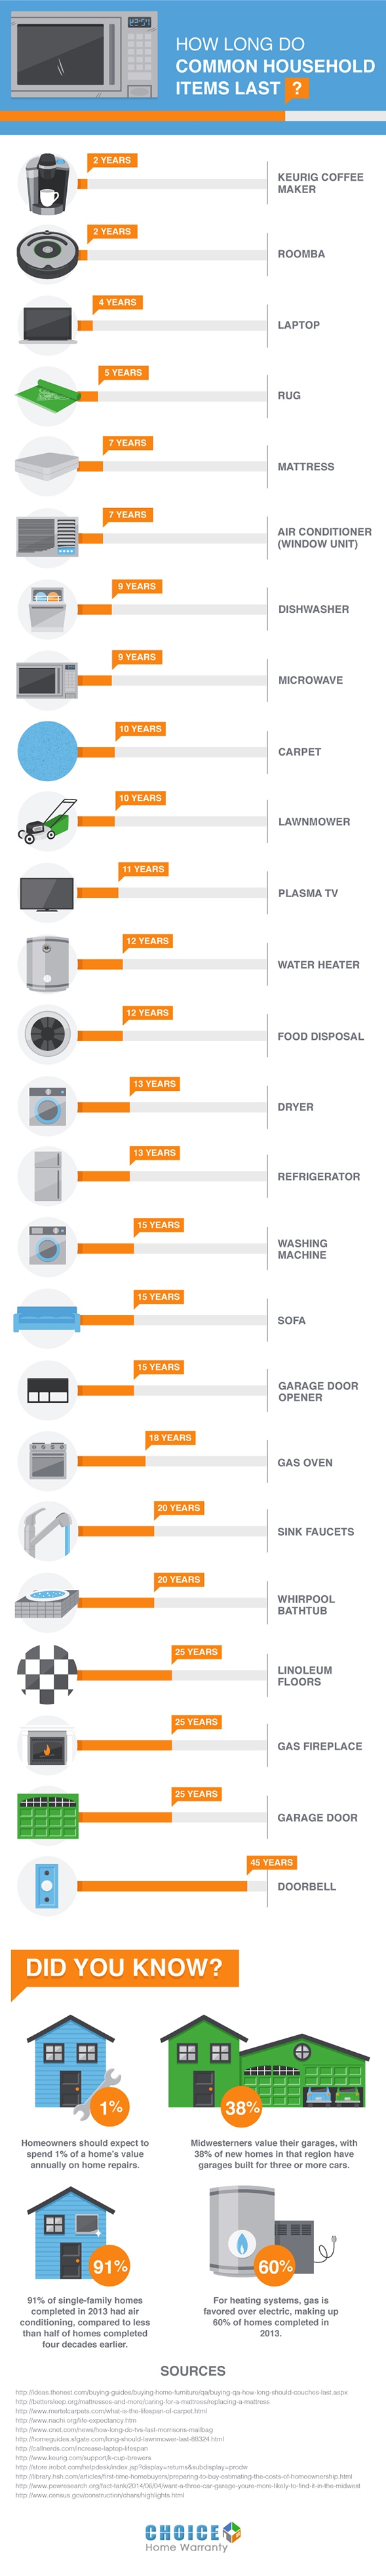 common_household_items_infographic